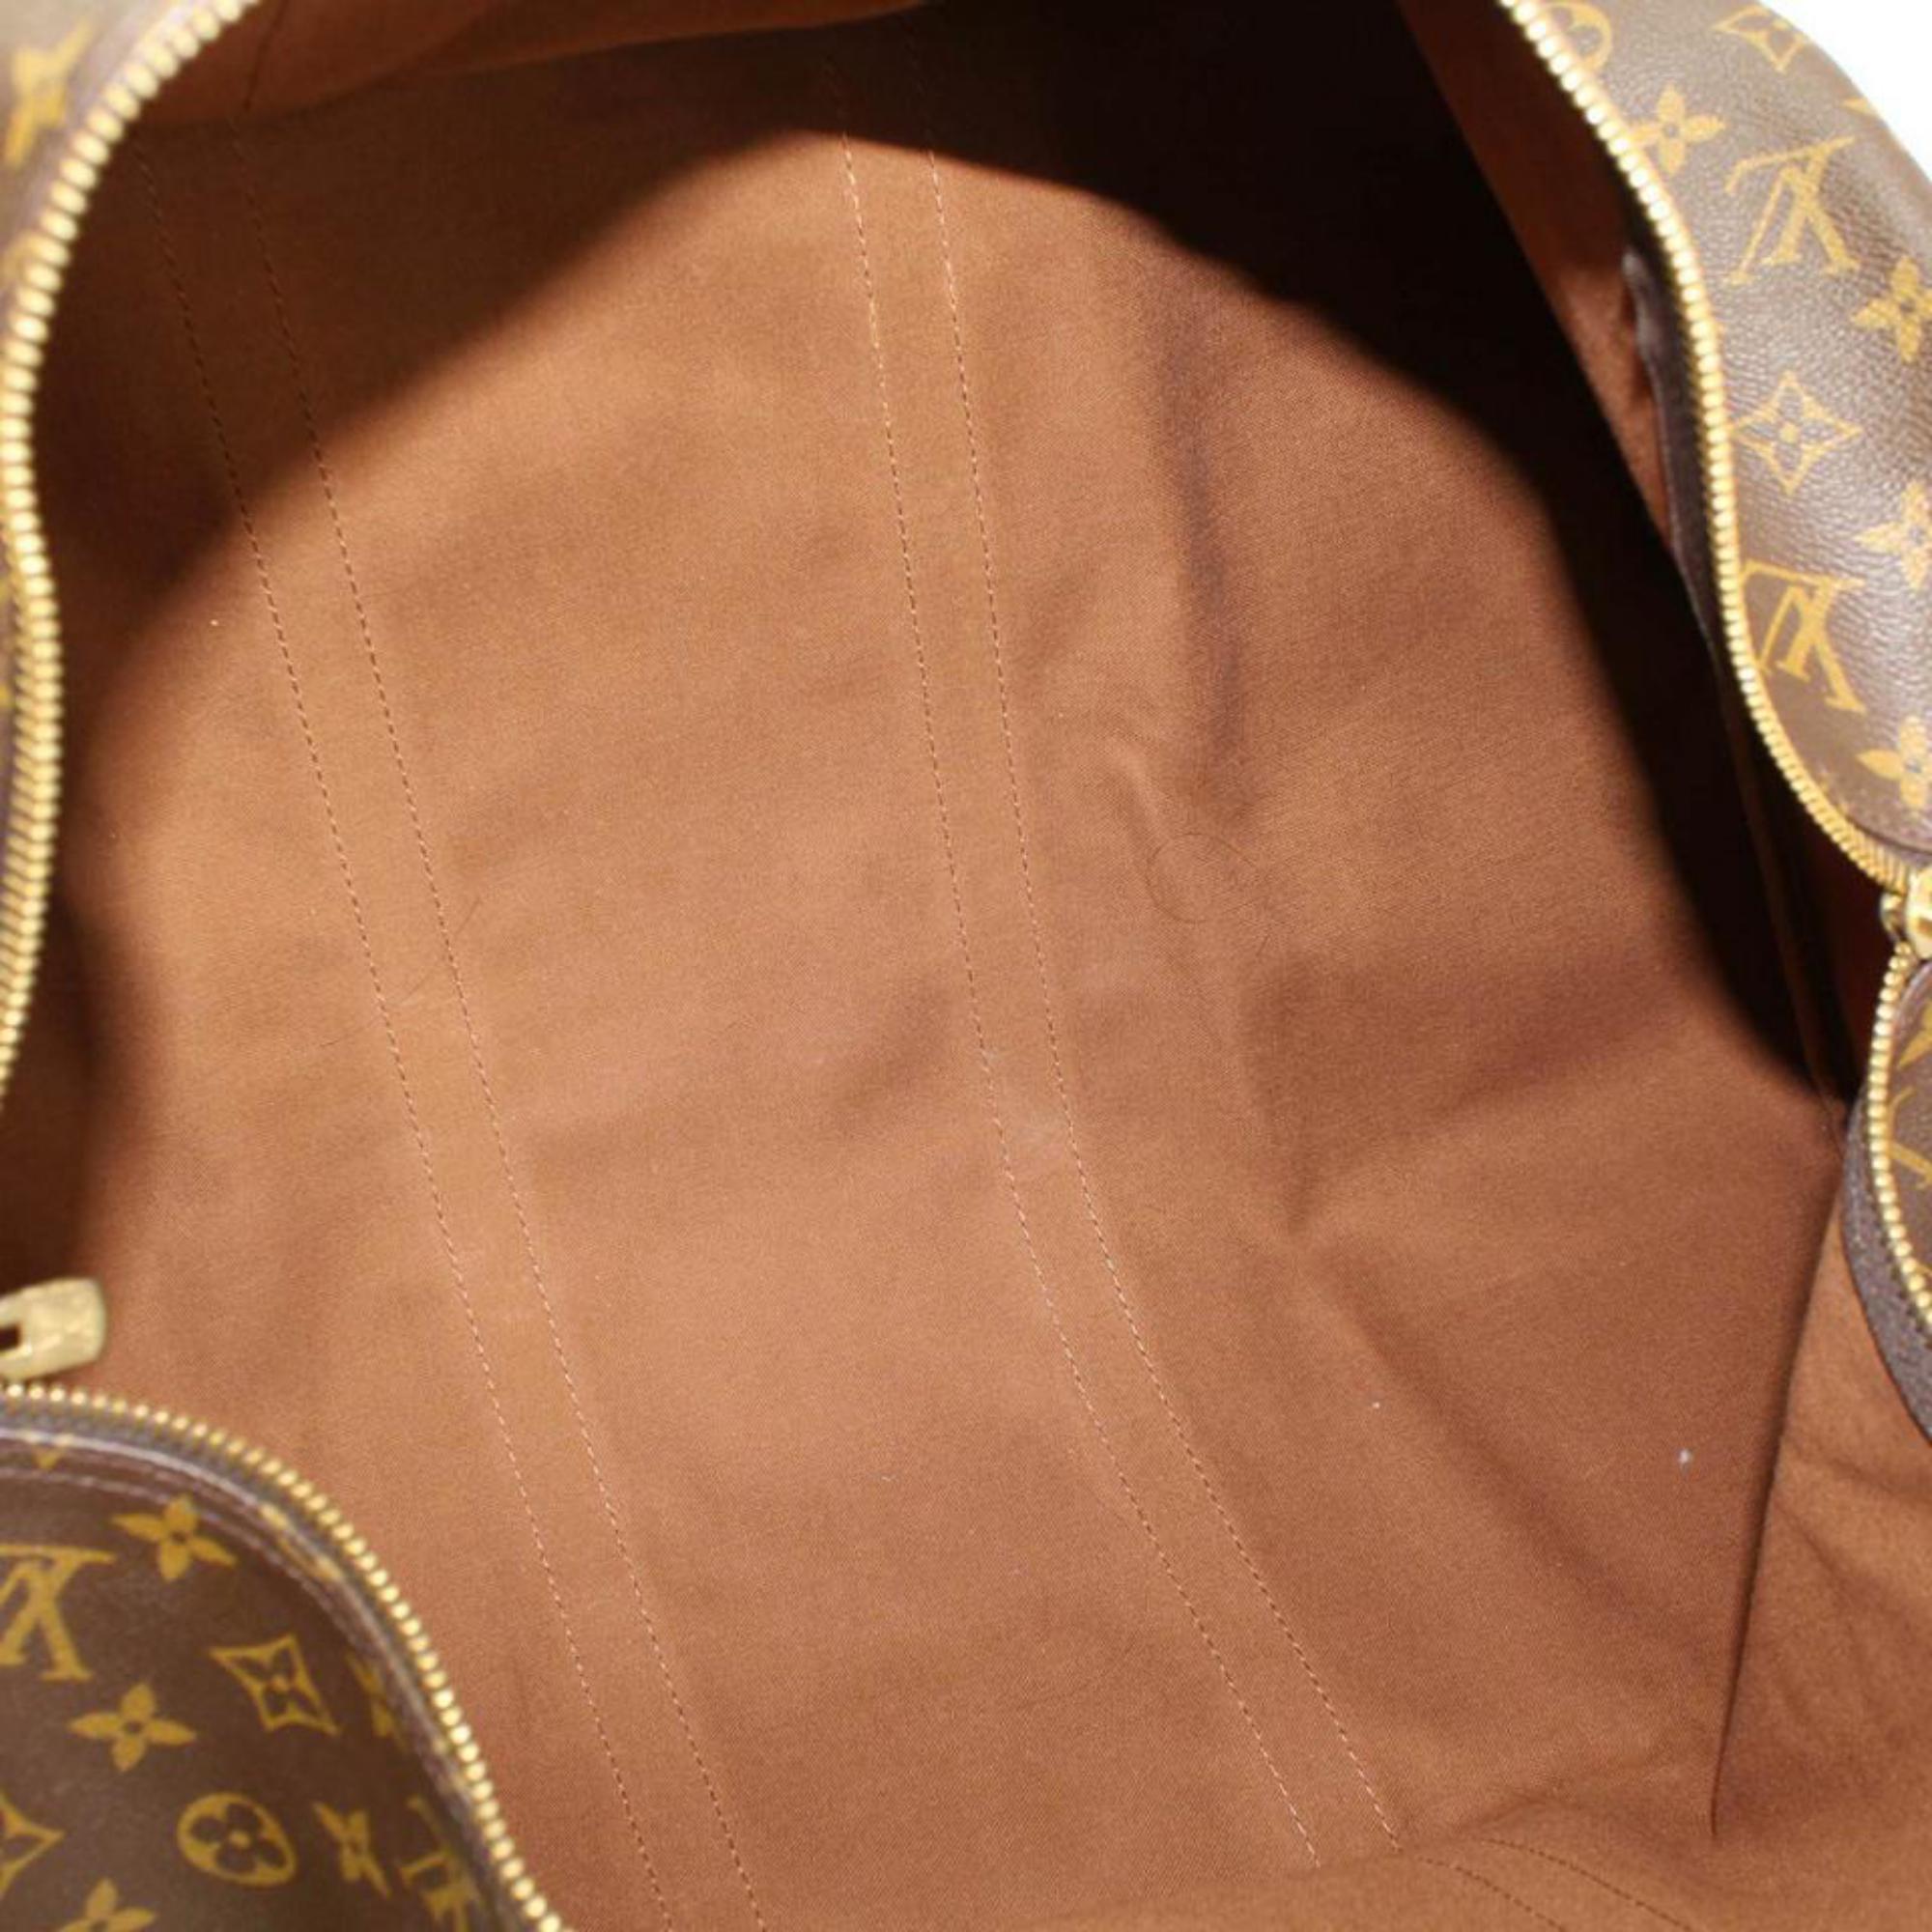 Louis Vuitton Keepall Monogram 55 866413 Brown Coated Canvas Weekend/Travel Bag In Good Condition For Sale In Forest Hills, NY